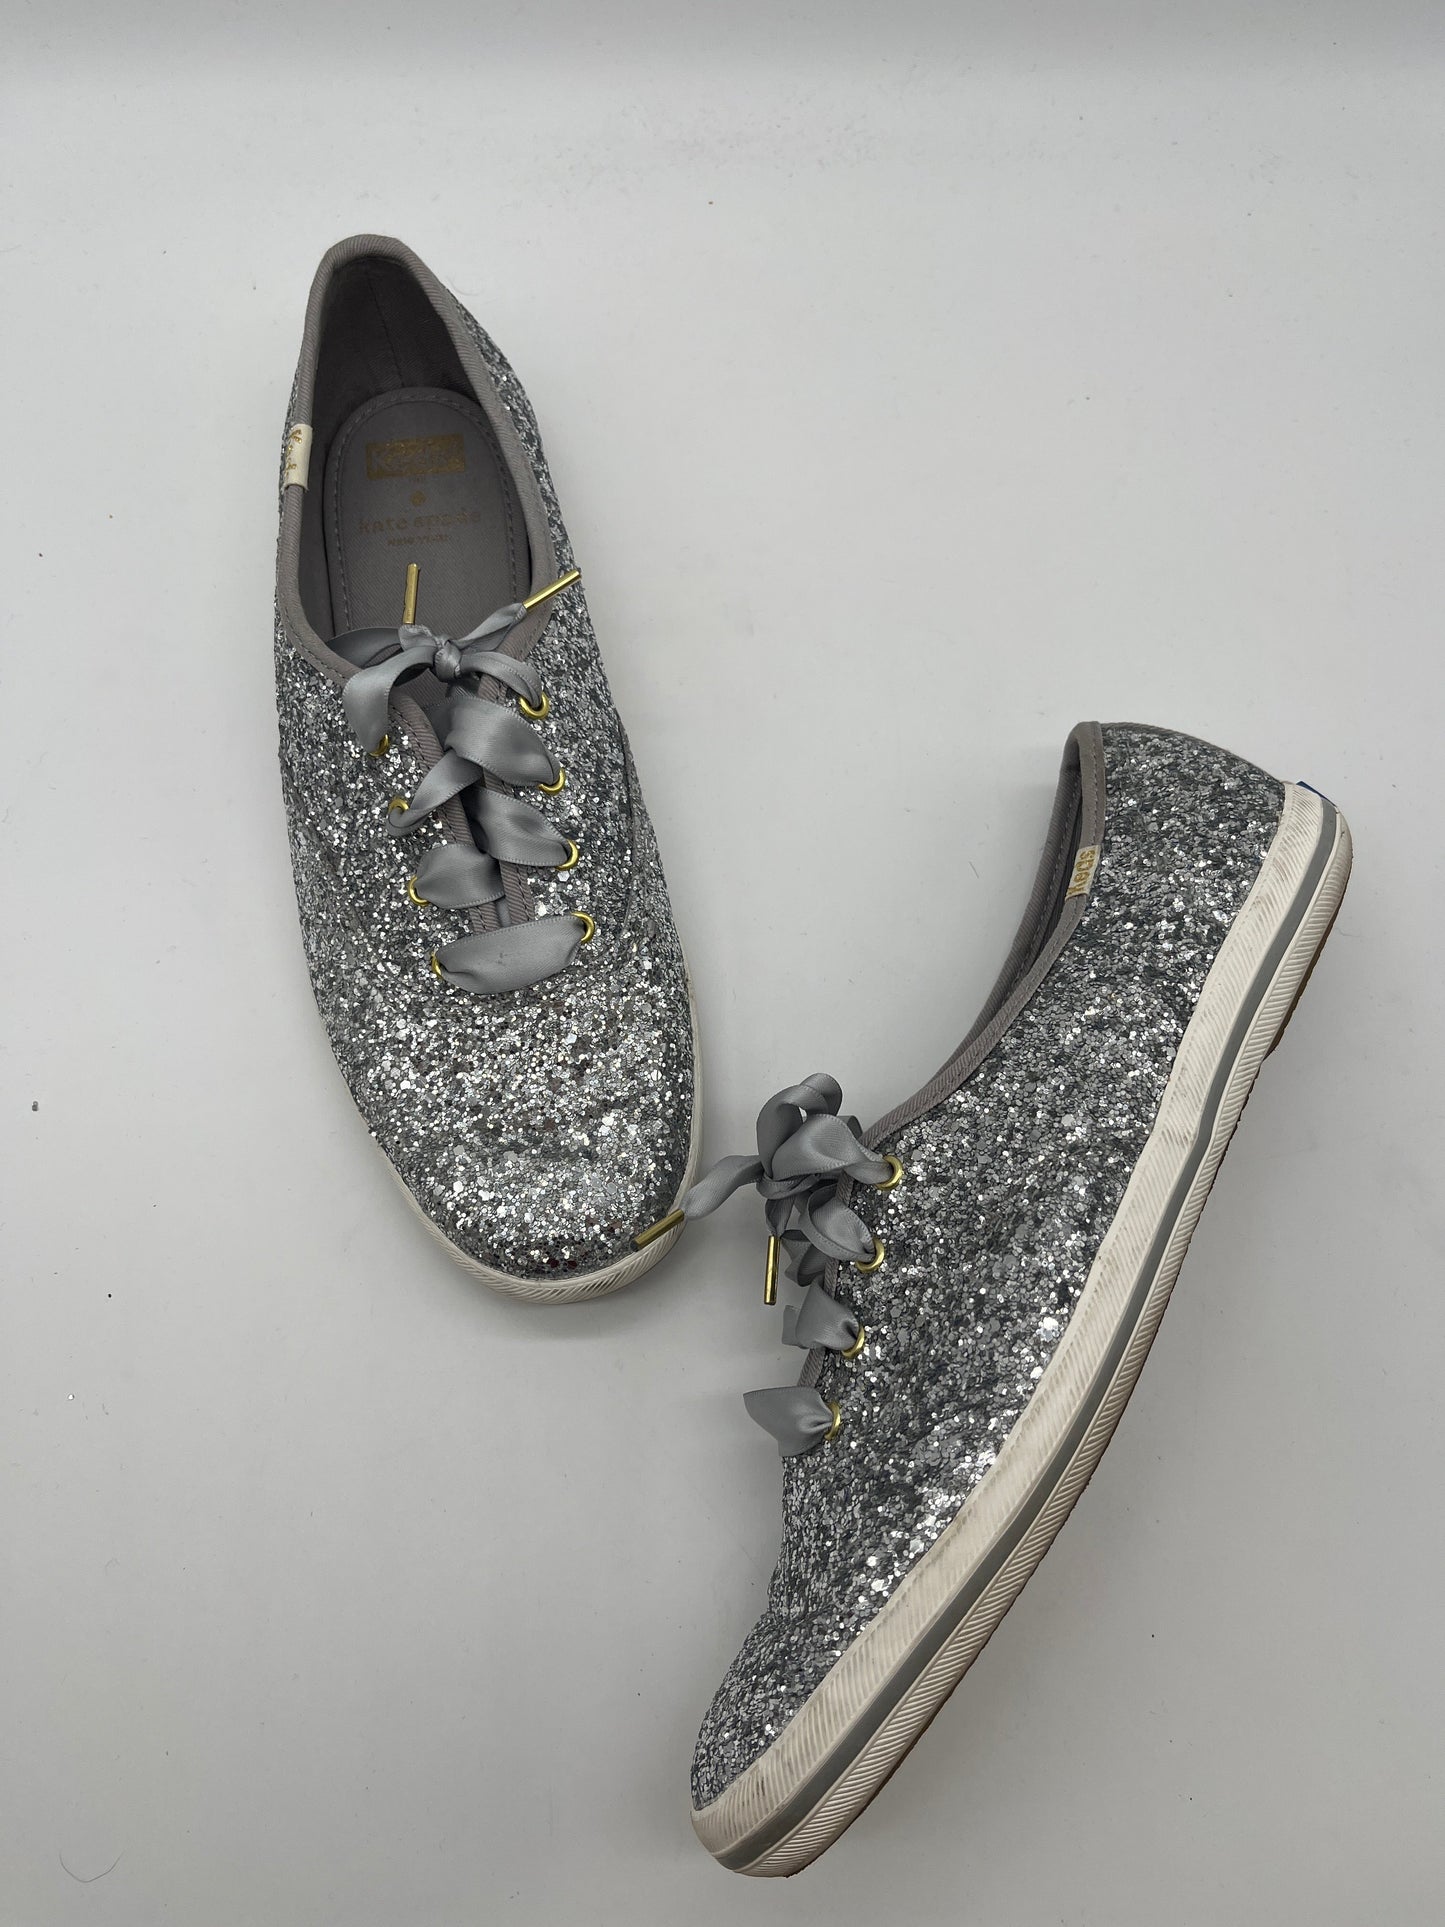 Silver Shoes Sneakers Keds, Size 8